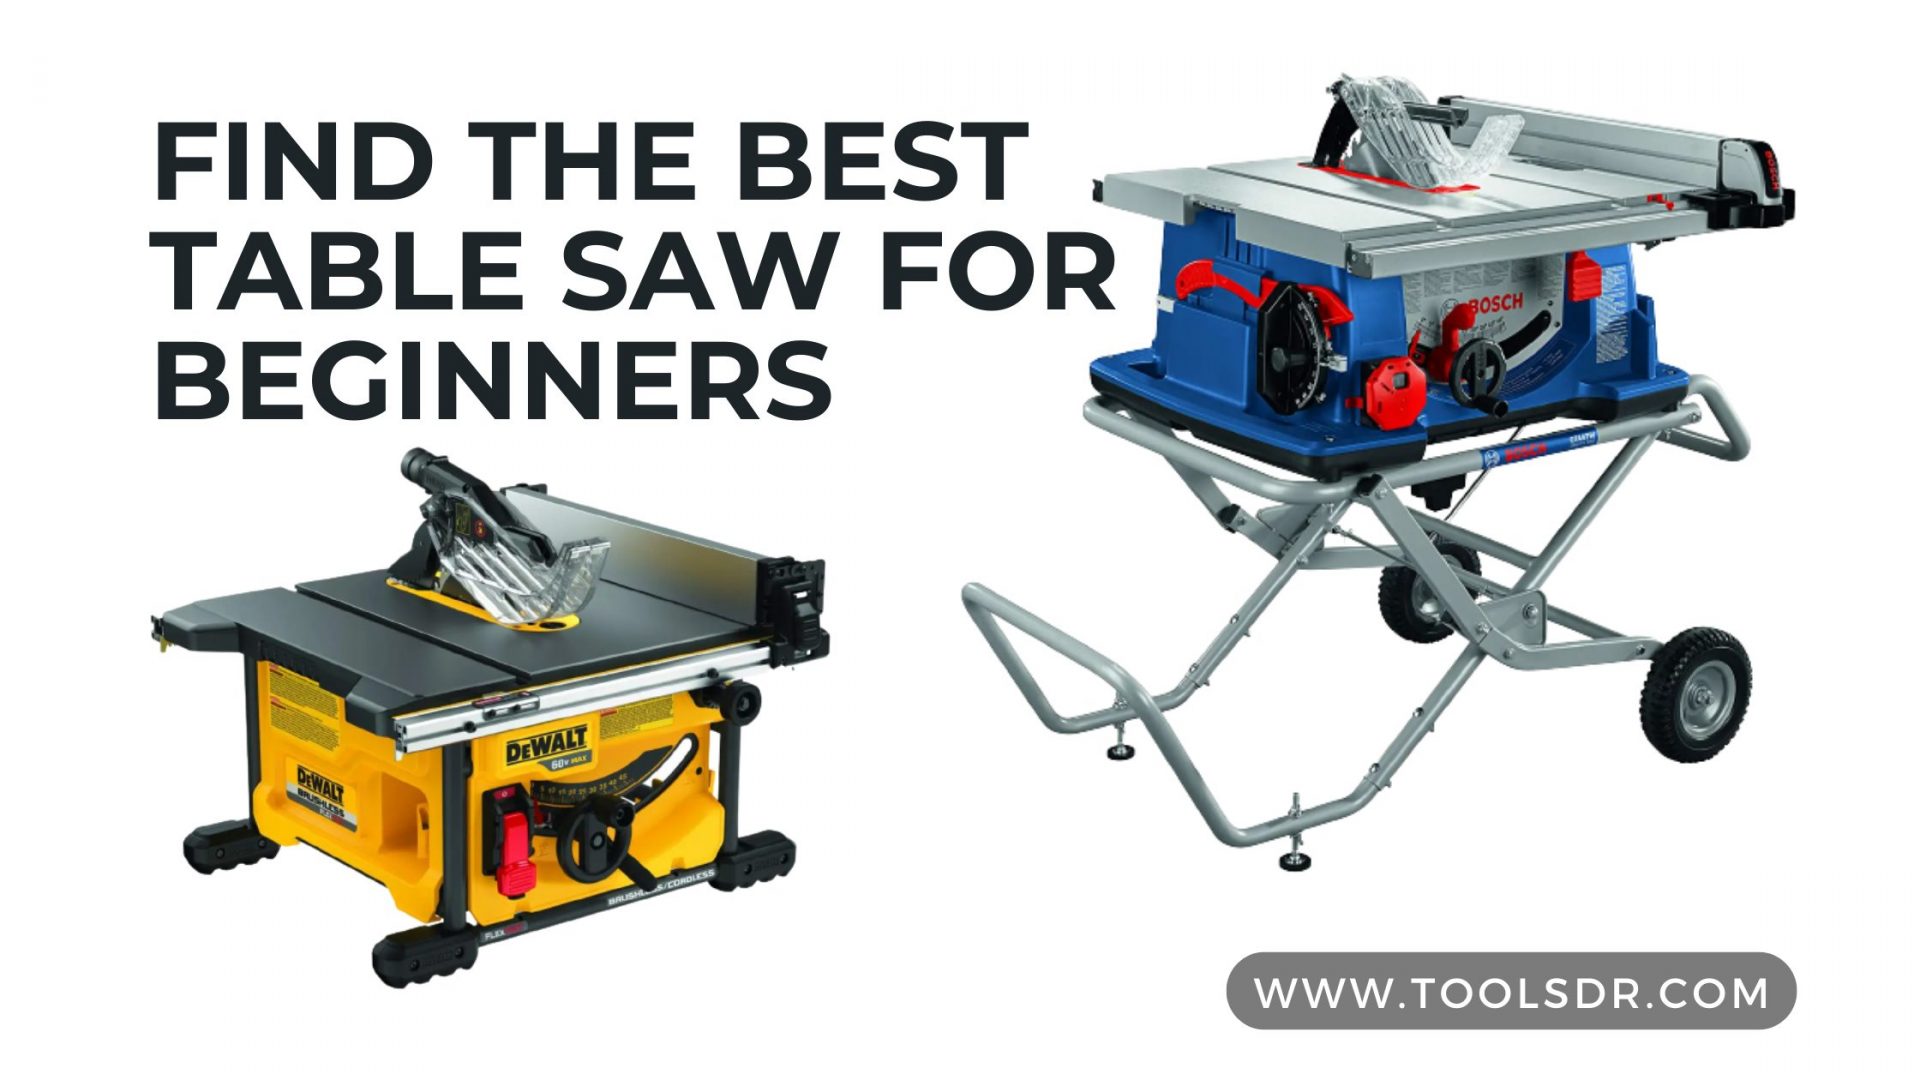 Find The Best Table Saw For Beginners